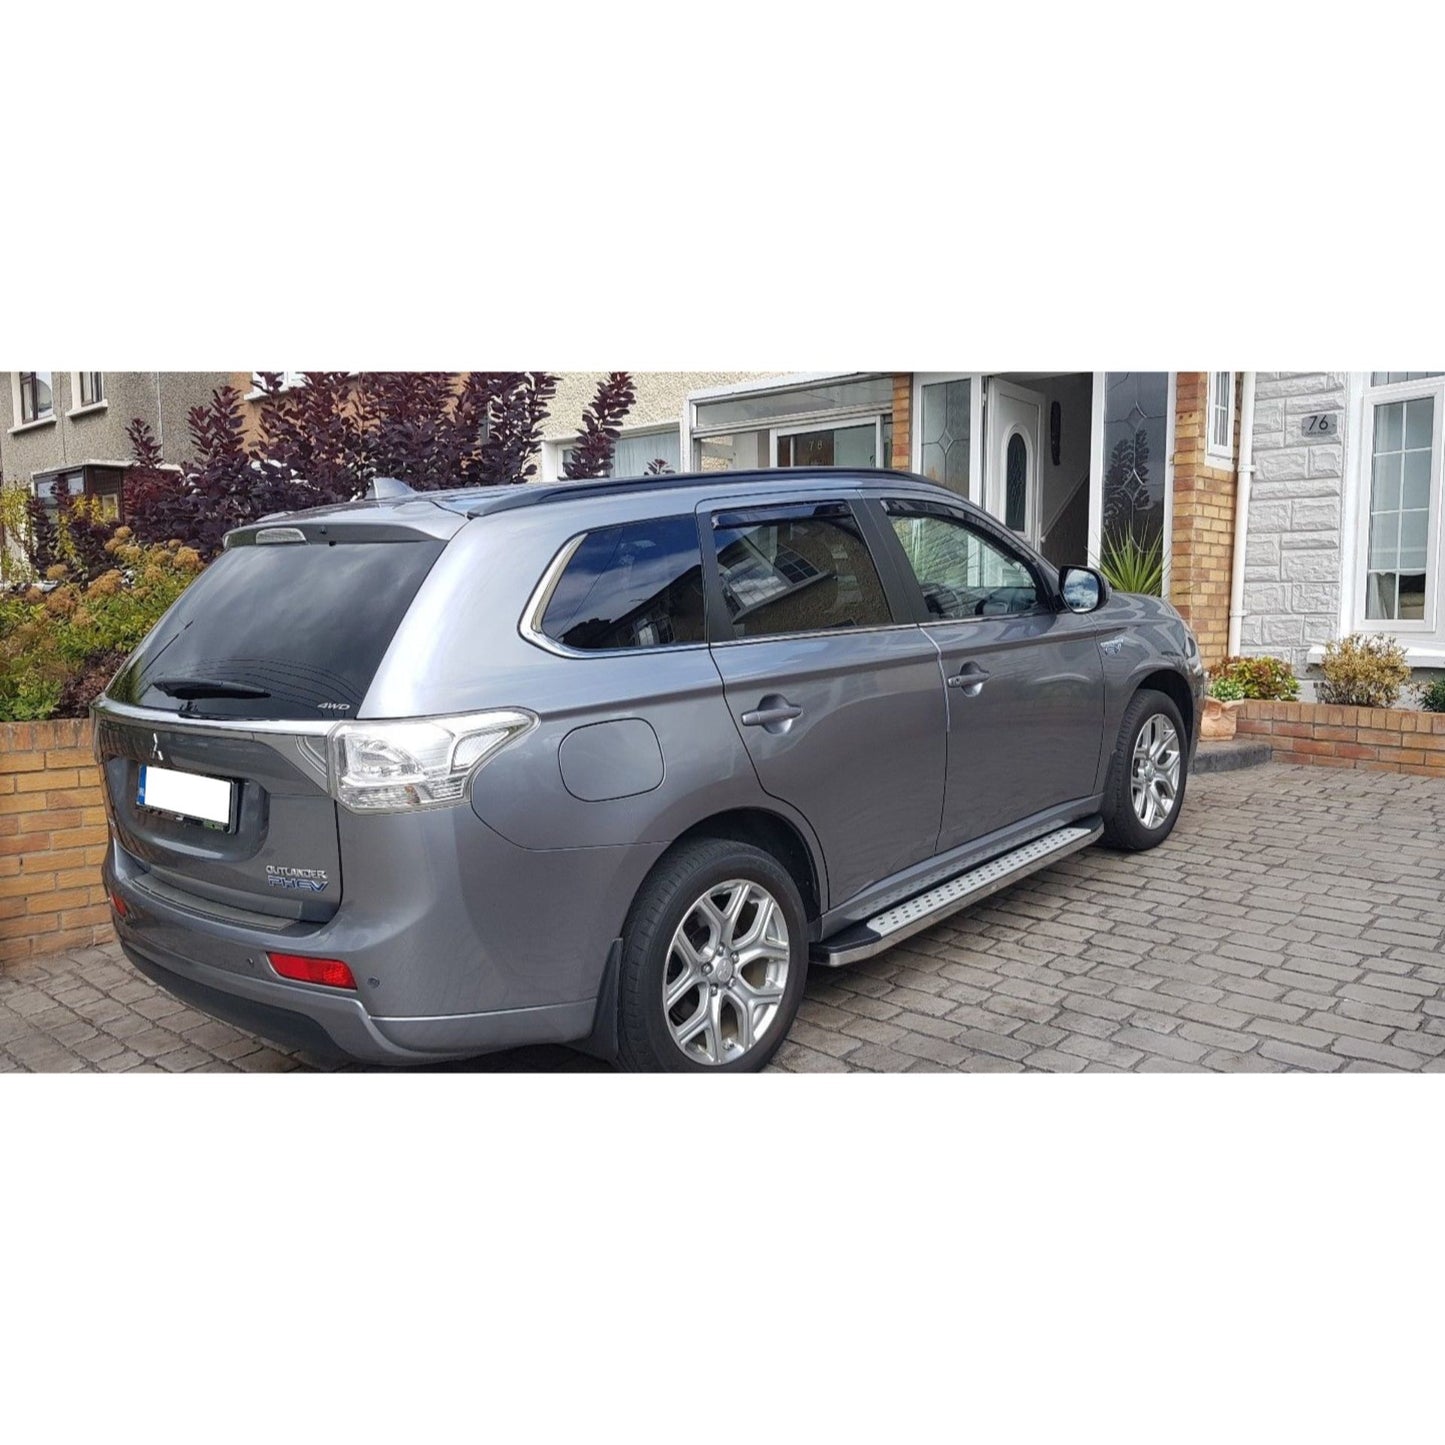 Freedom Side Steps Running Boards for Mitsubishi Outlander PHEV 2013-2021 -  - sold by Direct4x4